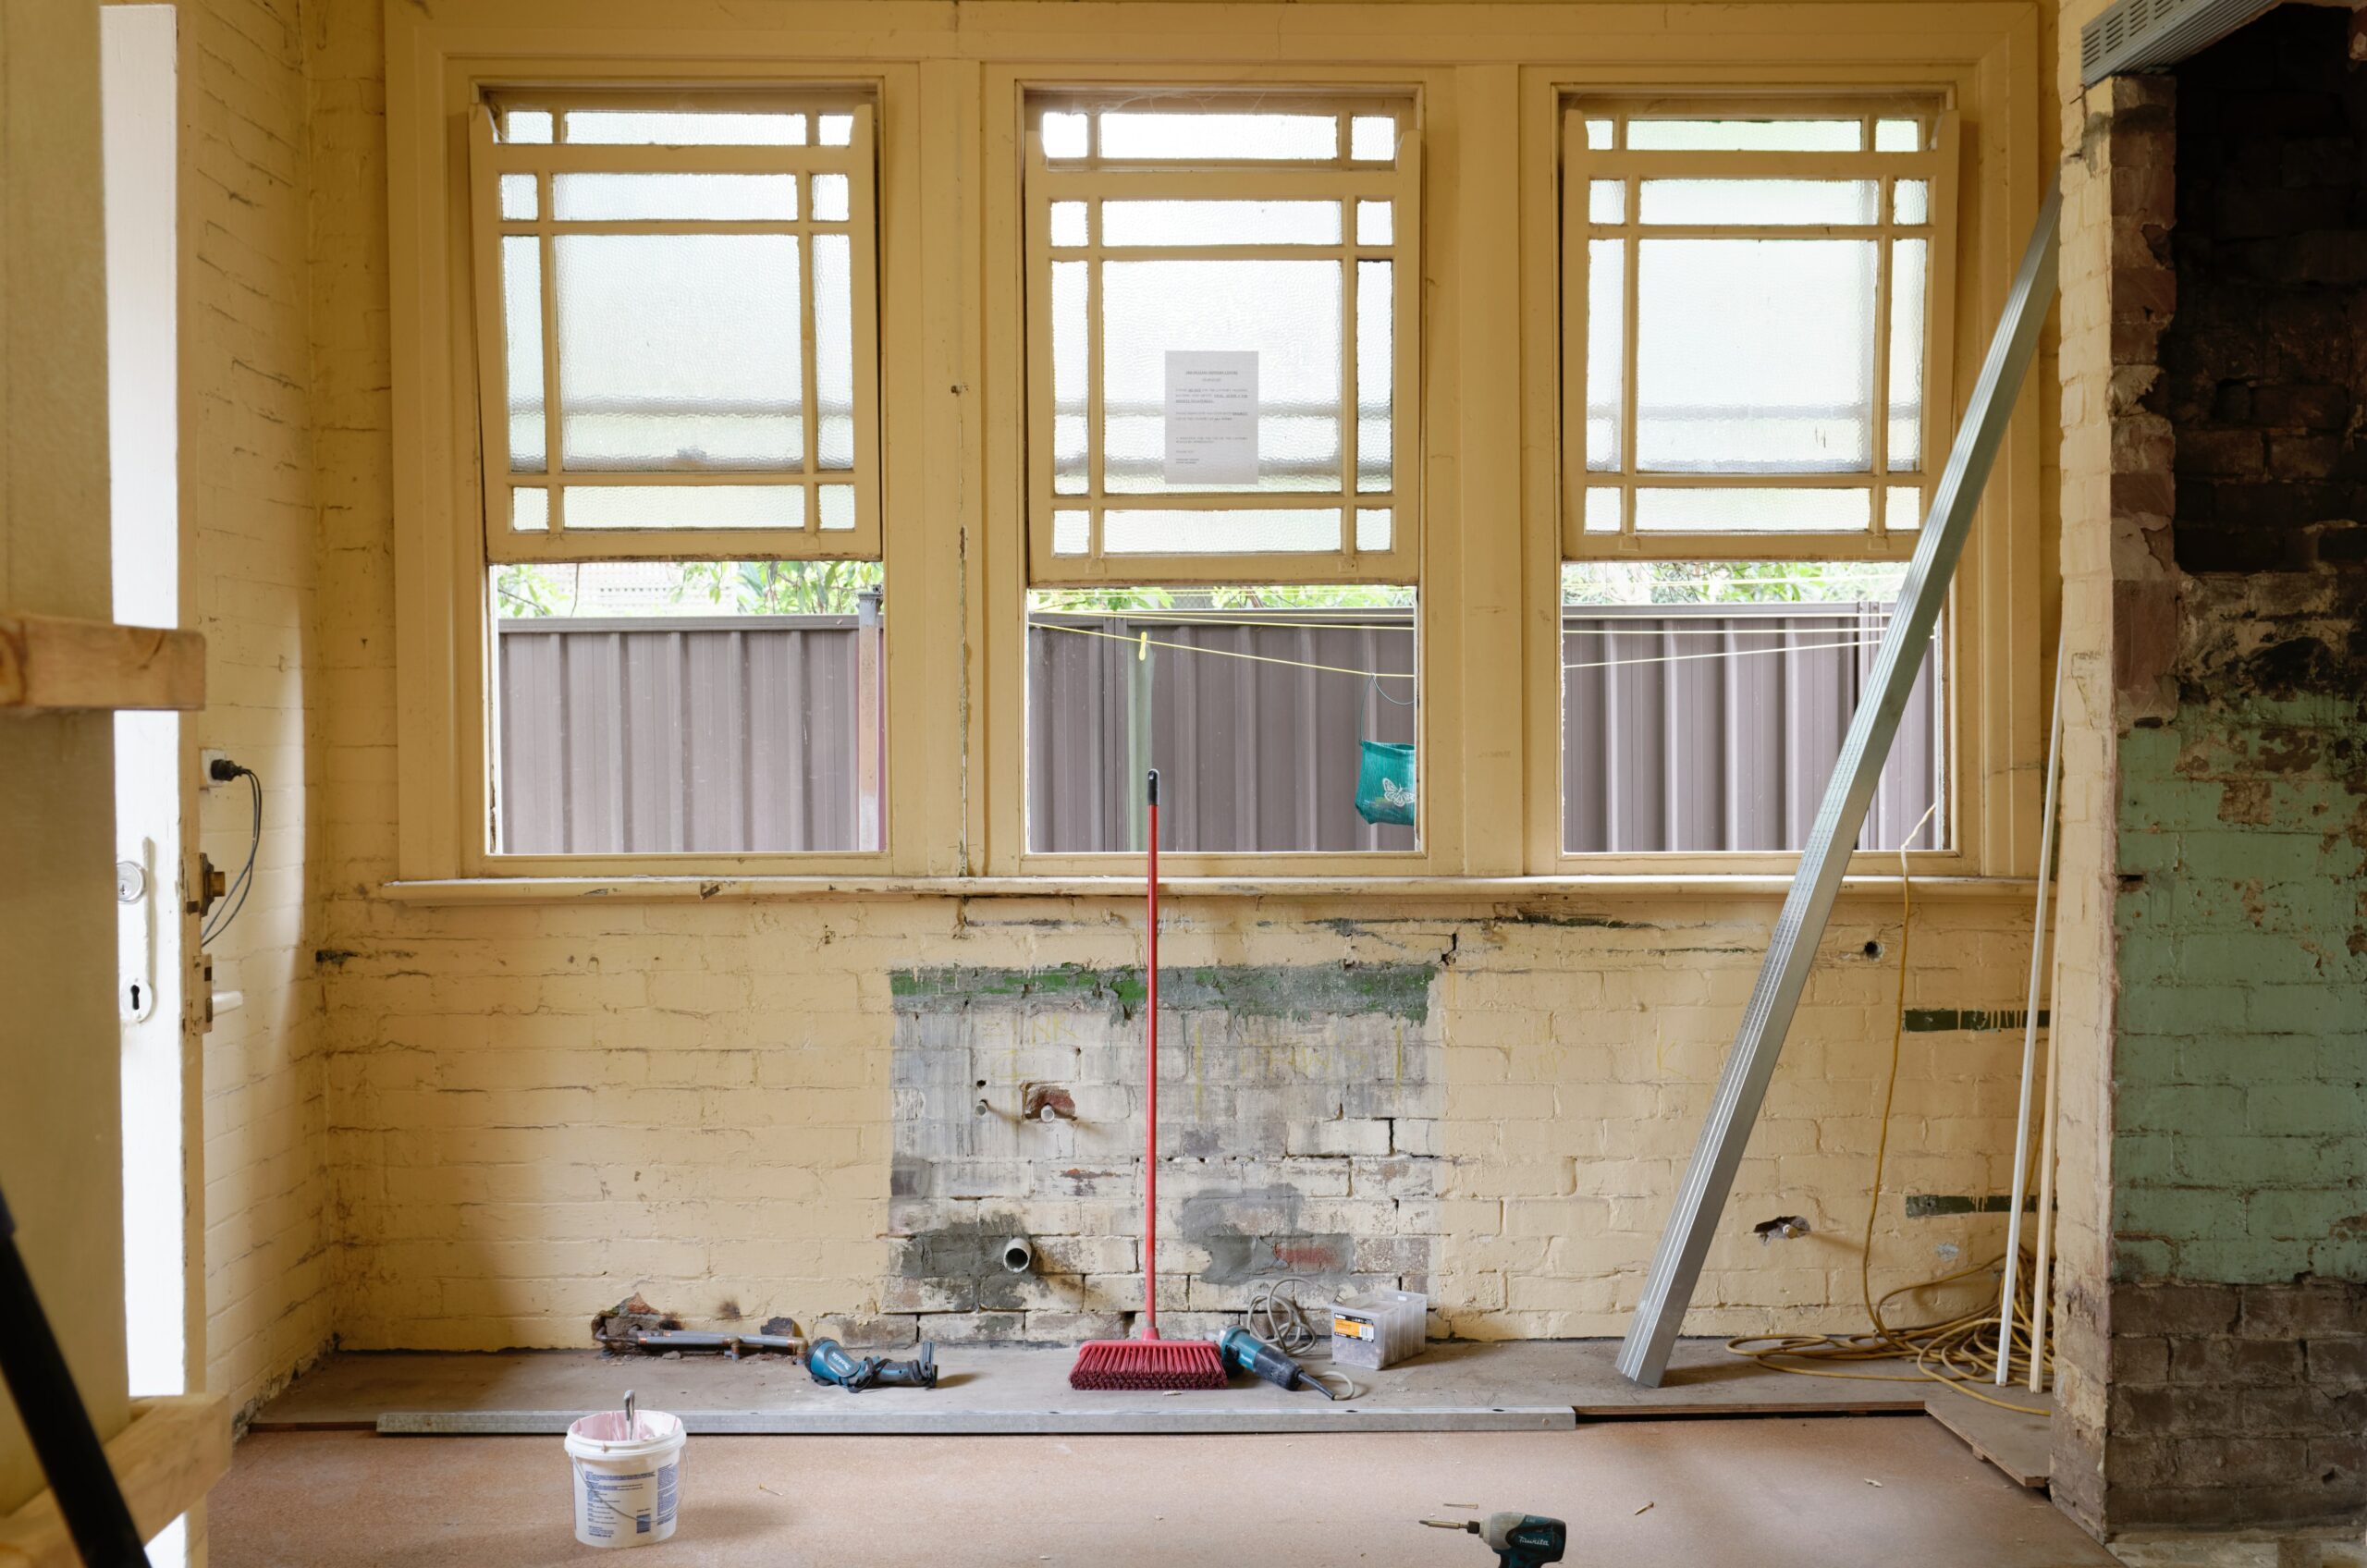 7 Points Checklist to consider before deciding to buy a Fixer-Upper